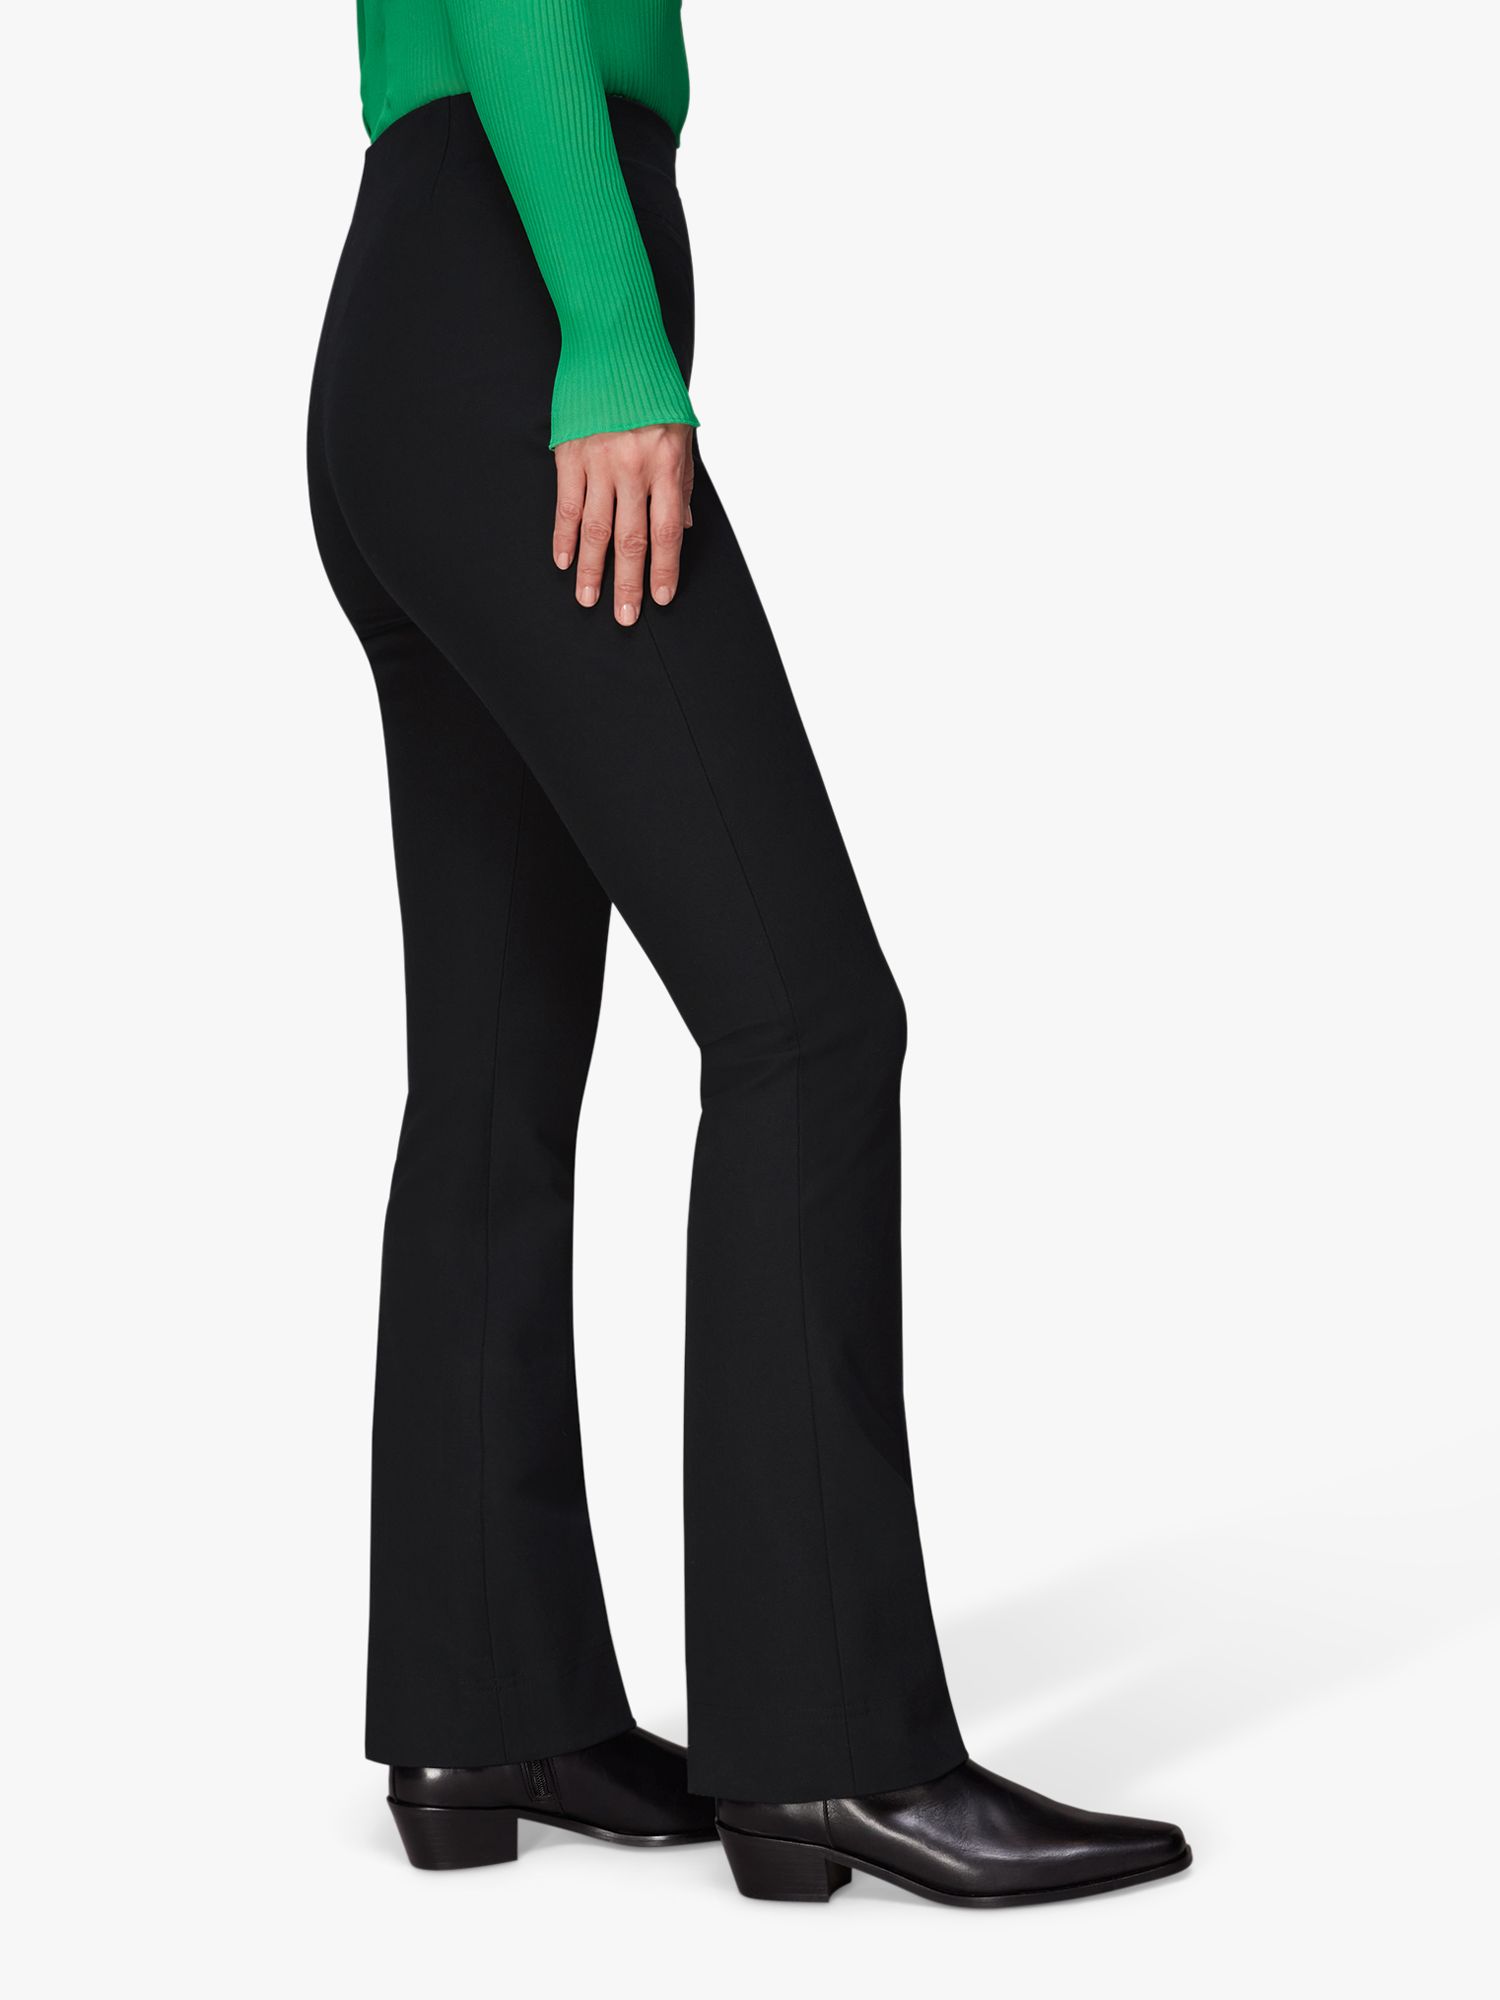 Whistles Lucy Kick Flare Trousers, Black at John Lewis & Partners